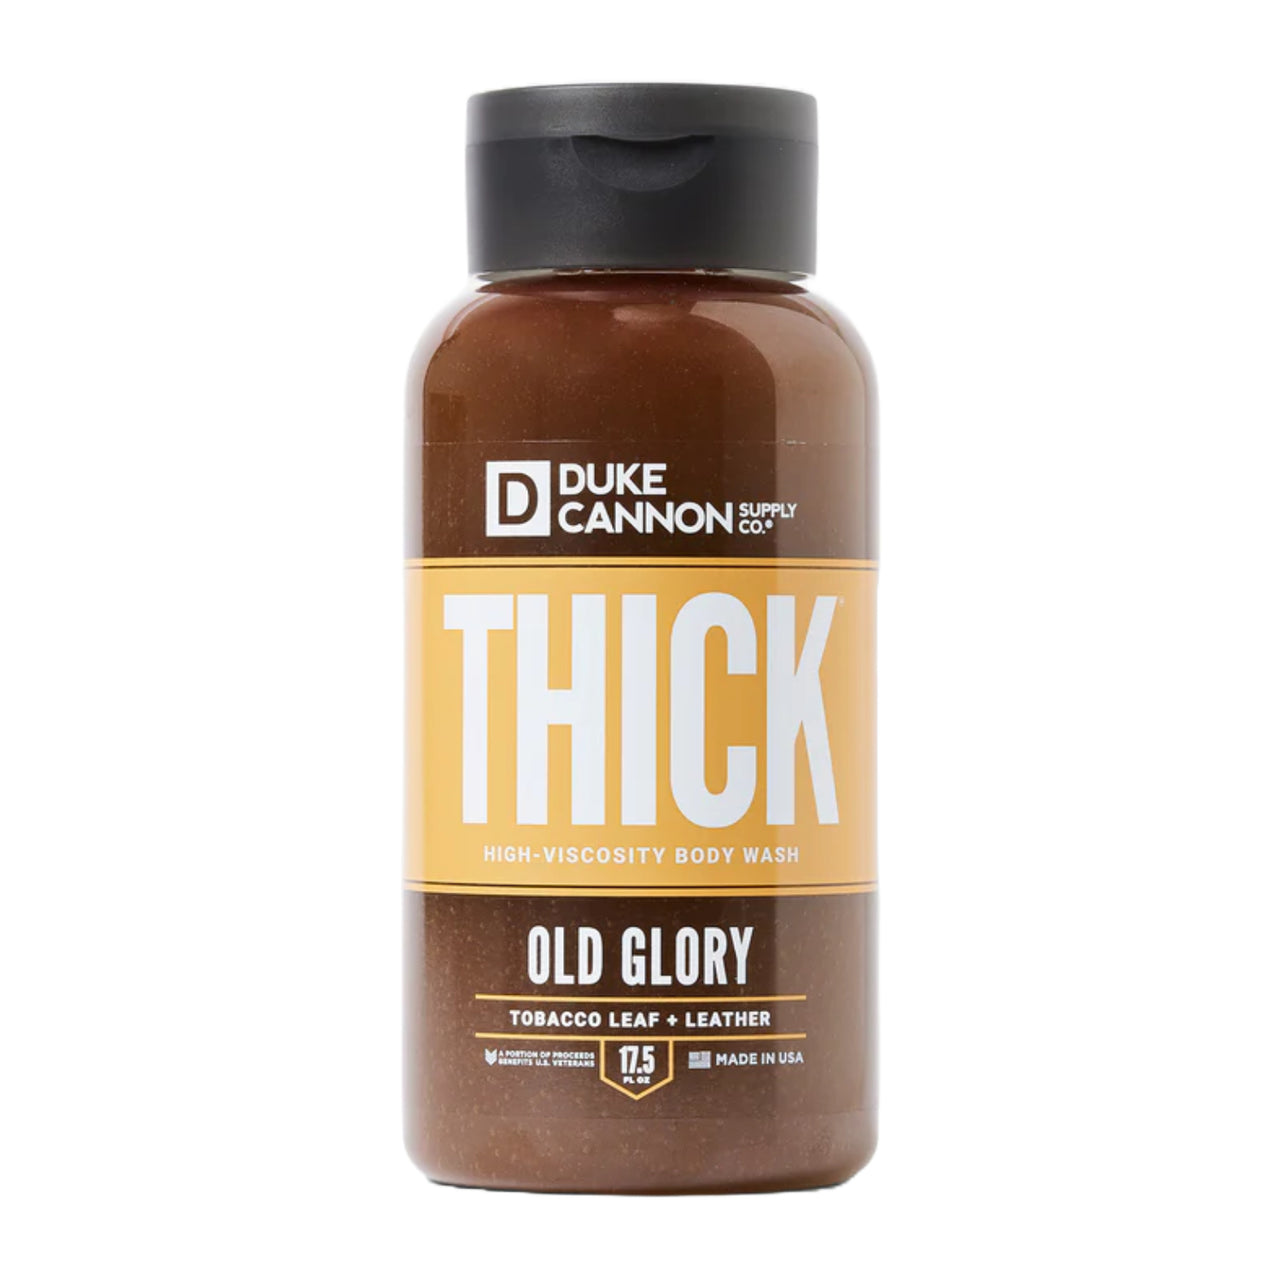 Thick High-Viscosity Body Wash | Old Glory